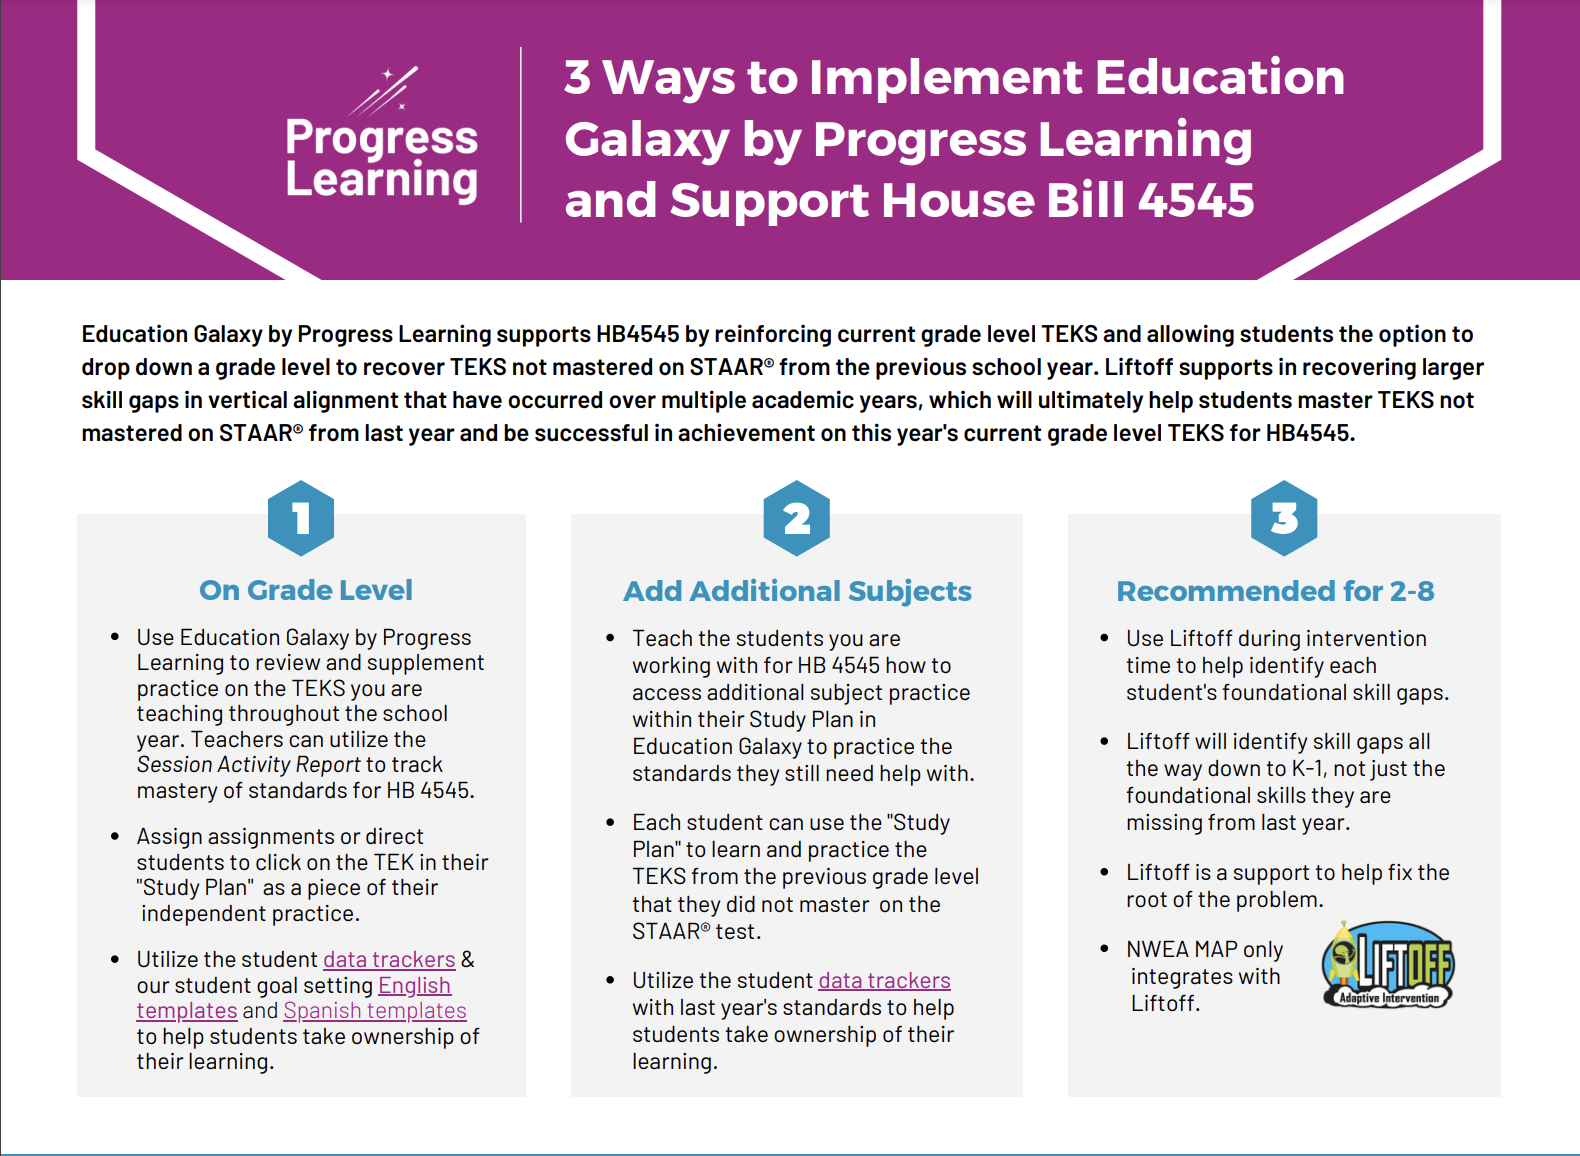 TX House Bill 4545 Empowering Every Student and Educator